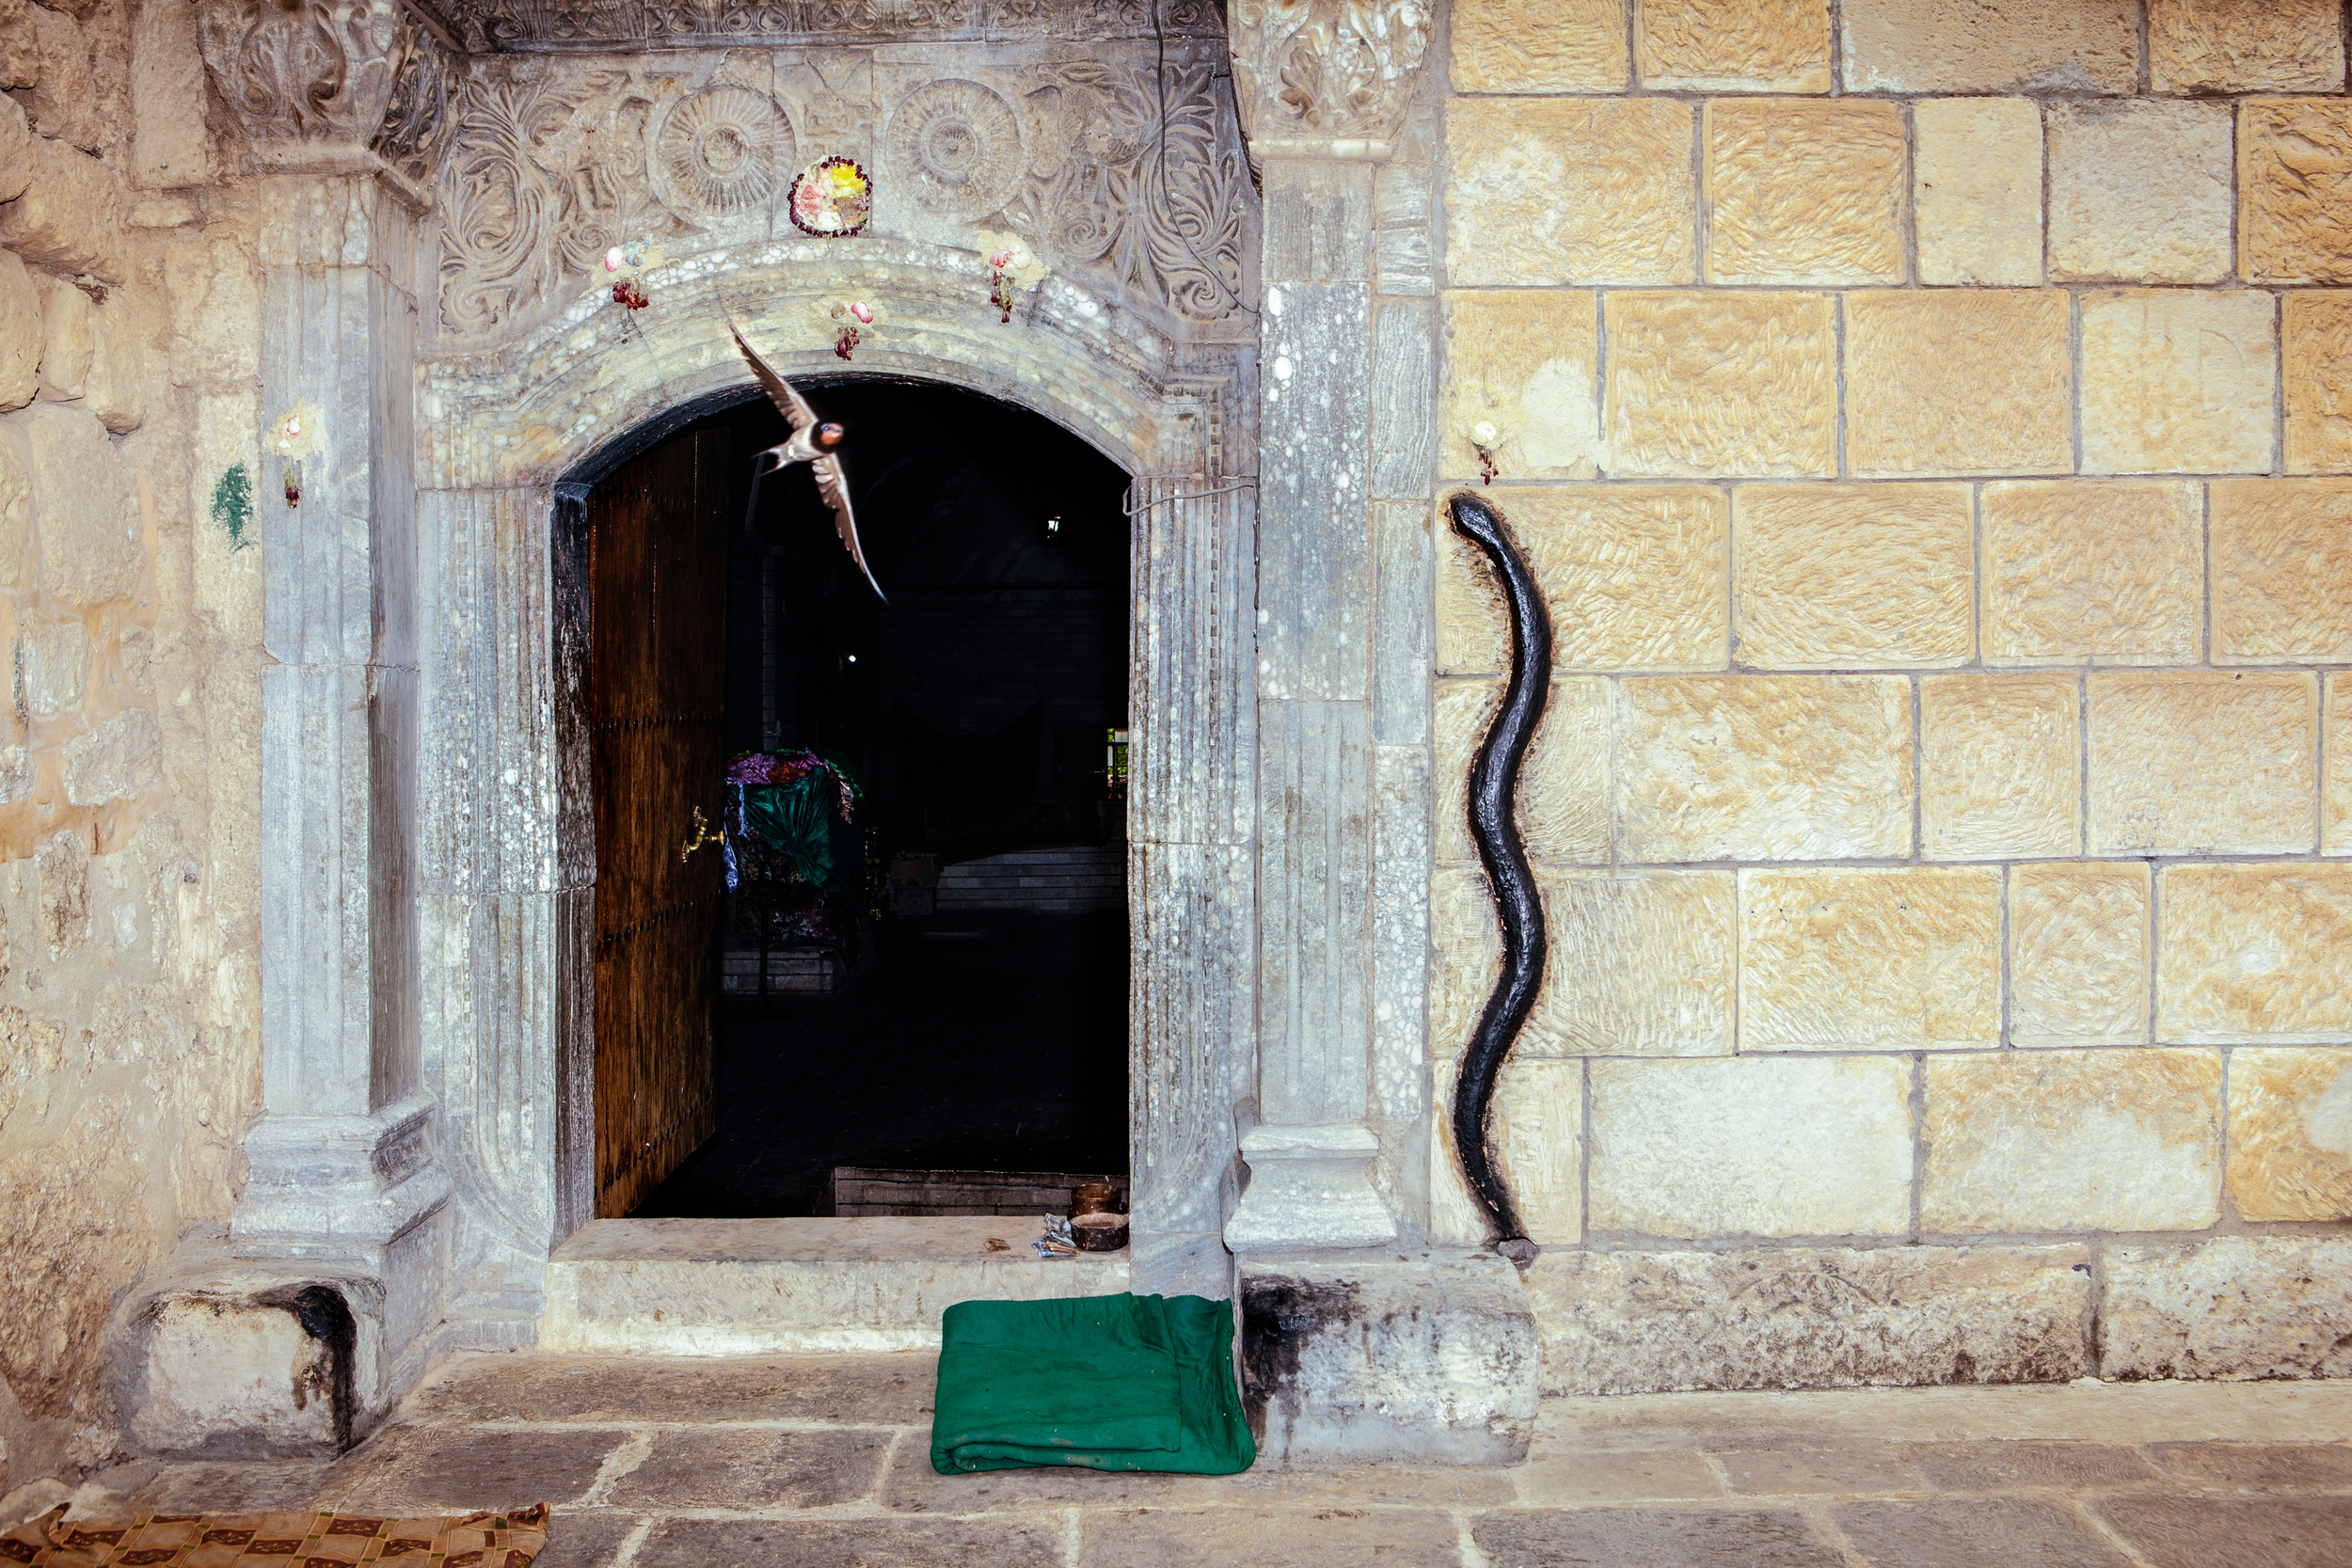  A bird flies out of Lalish temple which features a stone black snake on it's wall in Northern Iraqi Kurdistan. Lalish is the most sacred and only Yezidi temple in the world.&nbsp;According to legend, the snake was once a live serpent but was transfo